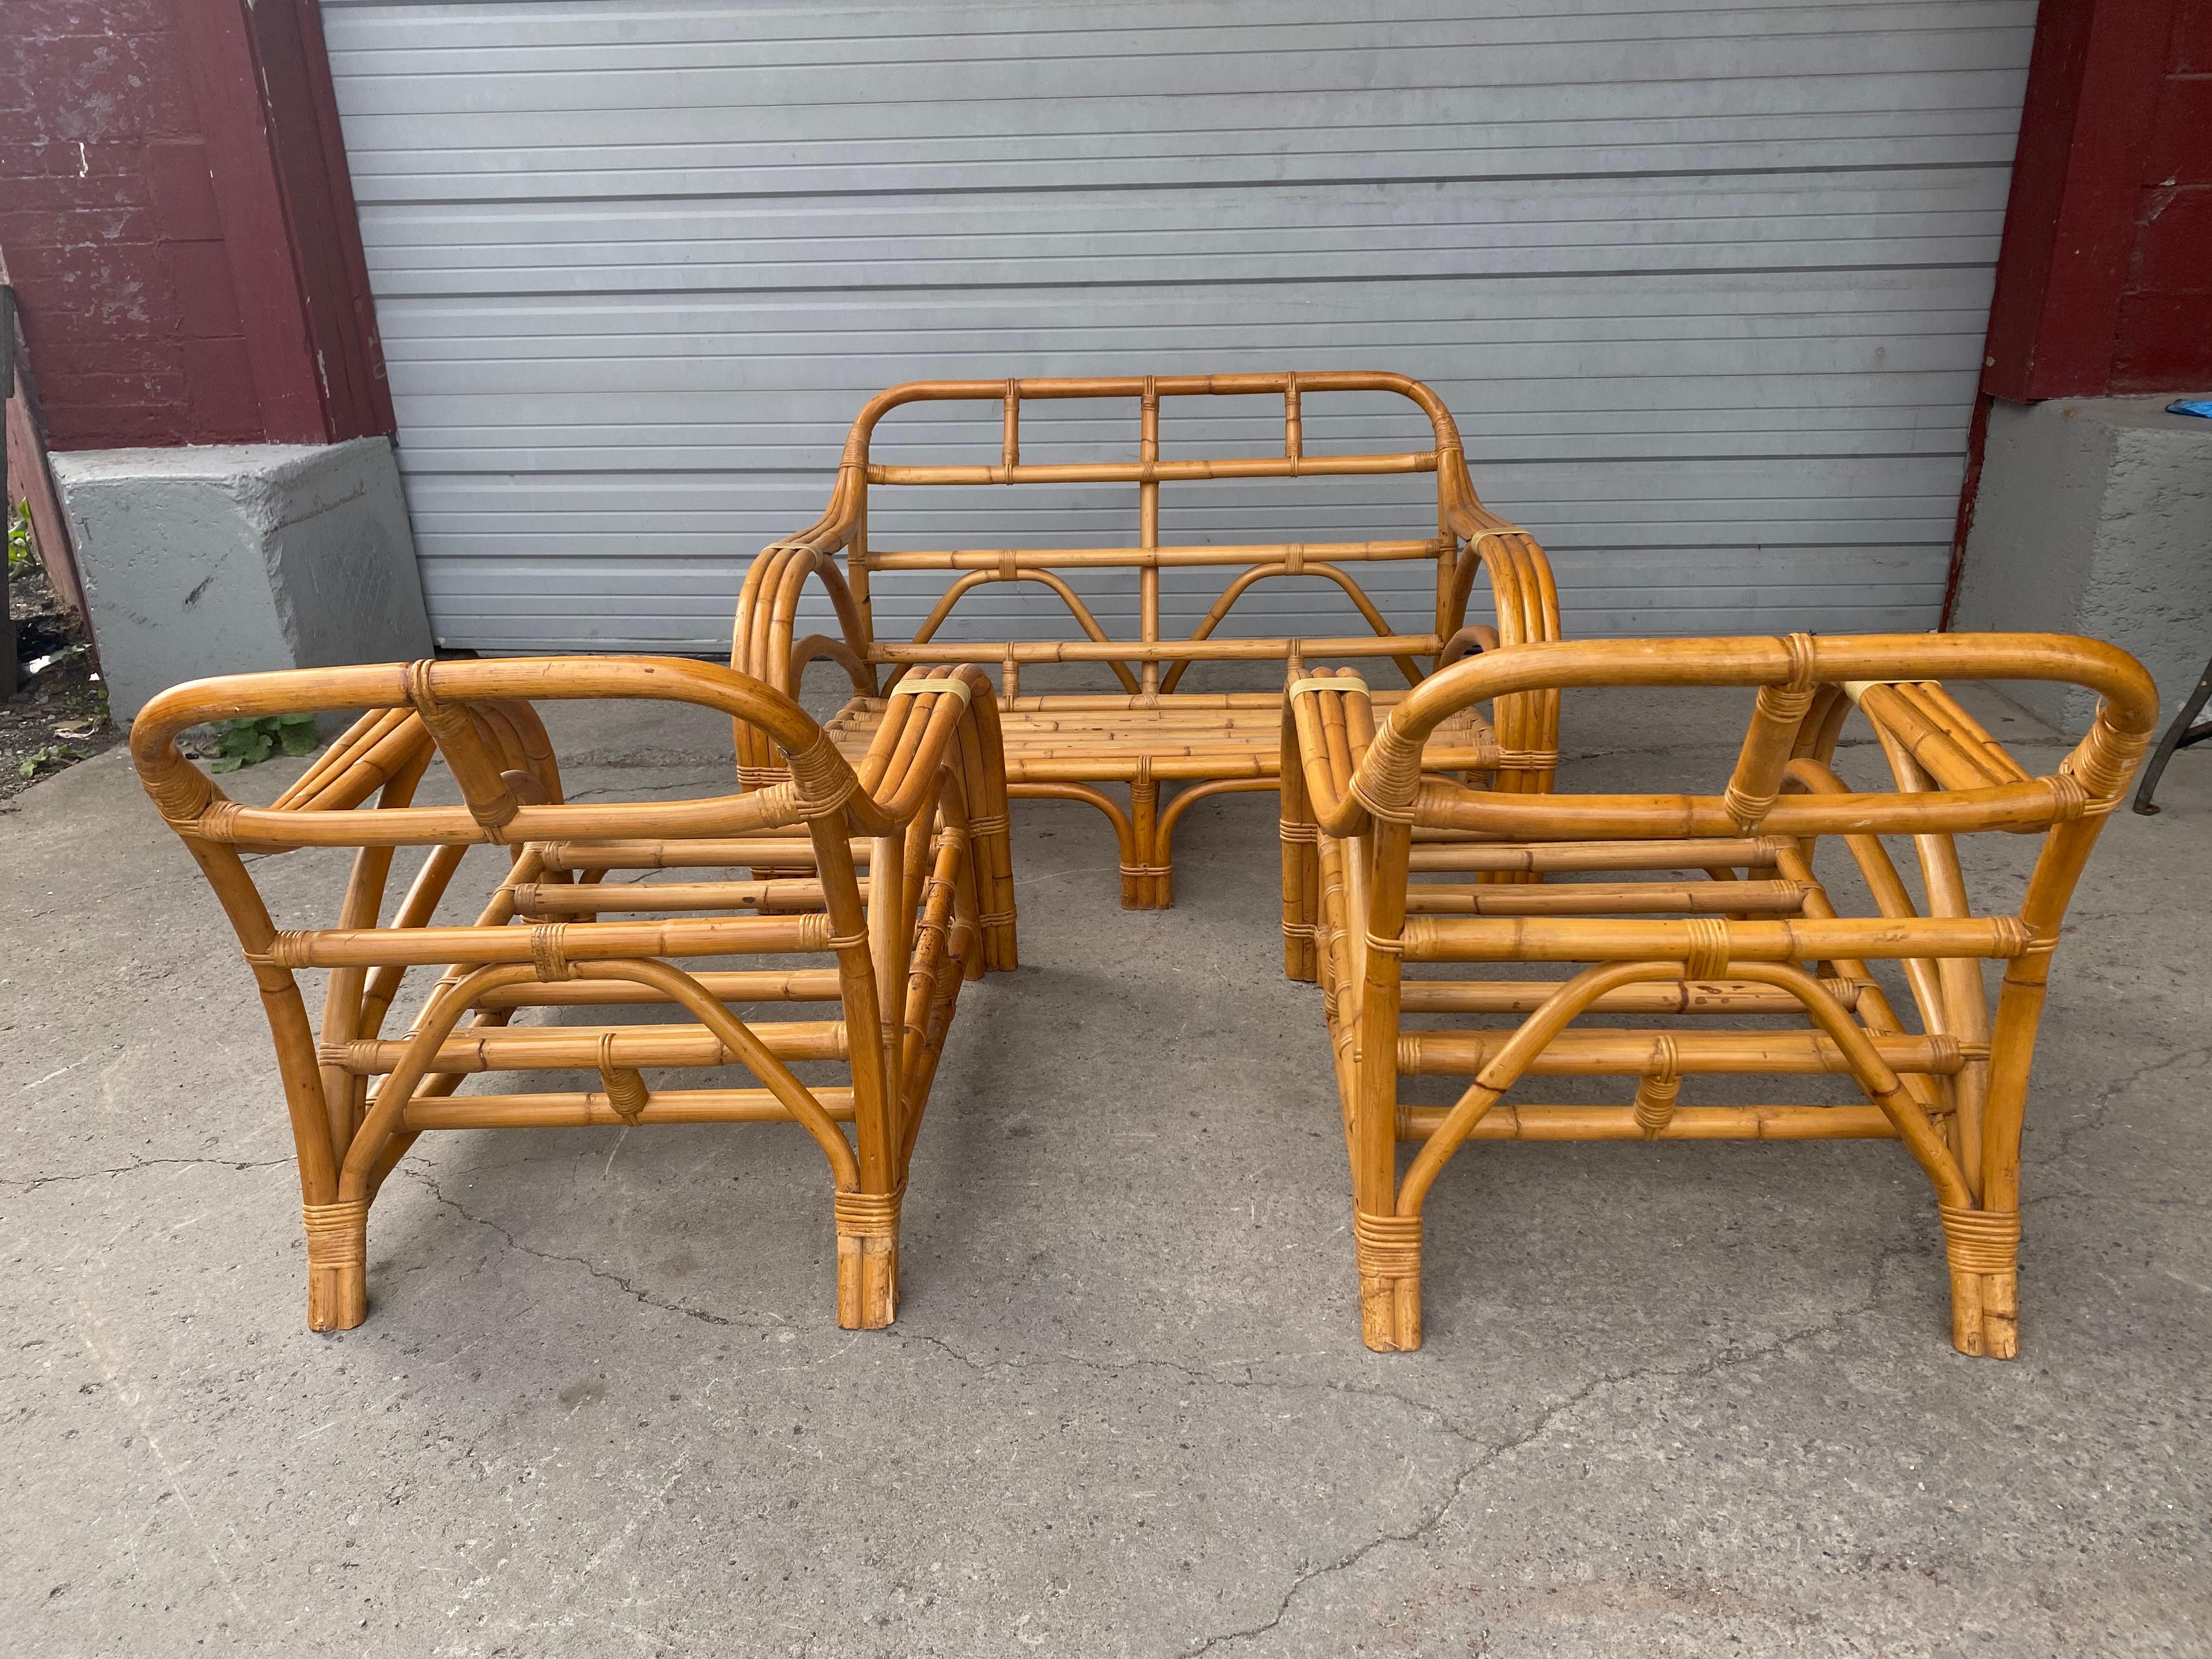 Streamline Art Deco / Modernist 3-Piece Bamboo Set by Rattan Art / Philippines In Good Condition For Sale In Buffalo, NY